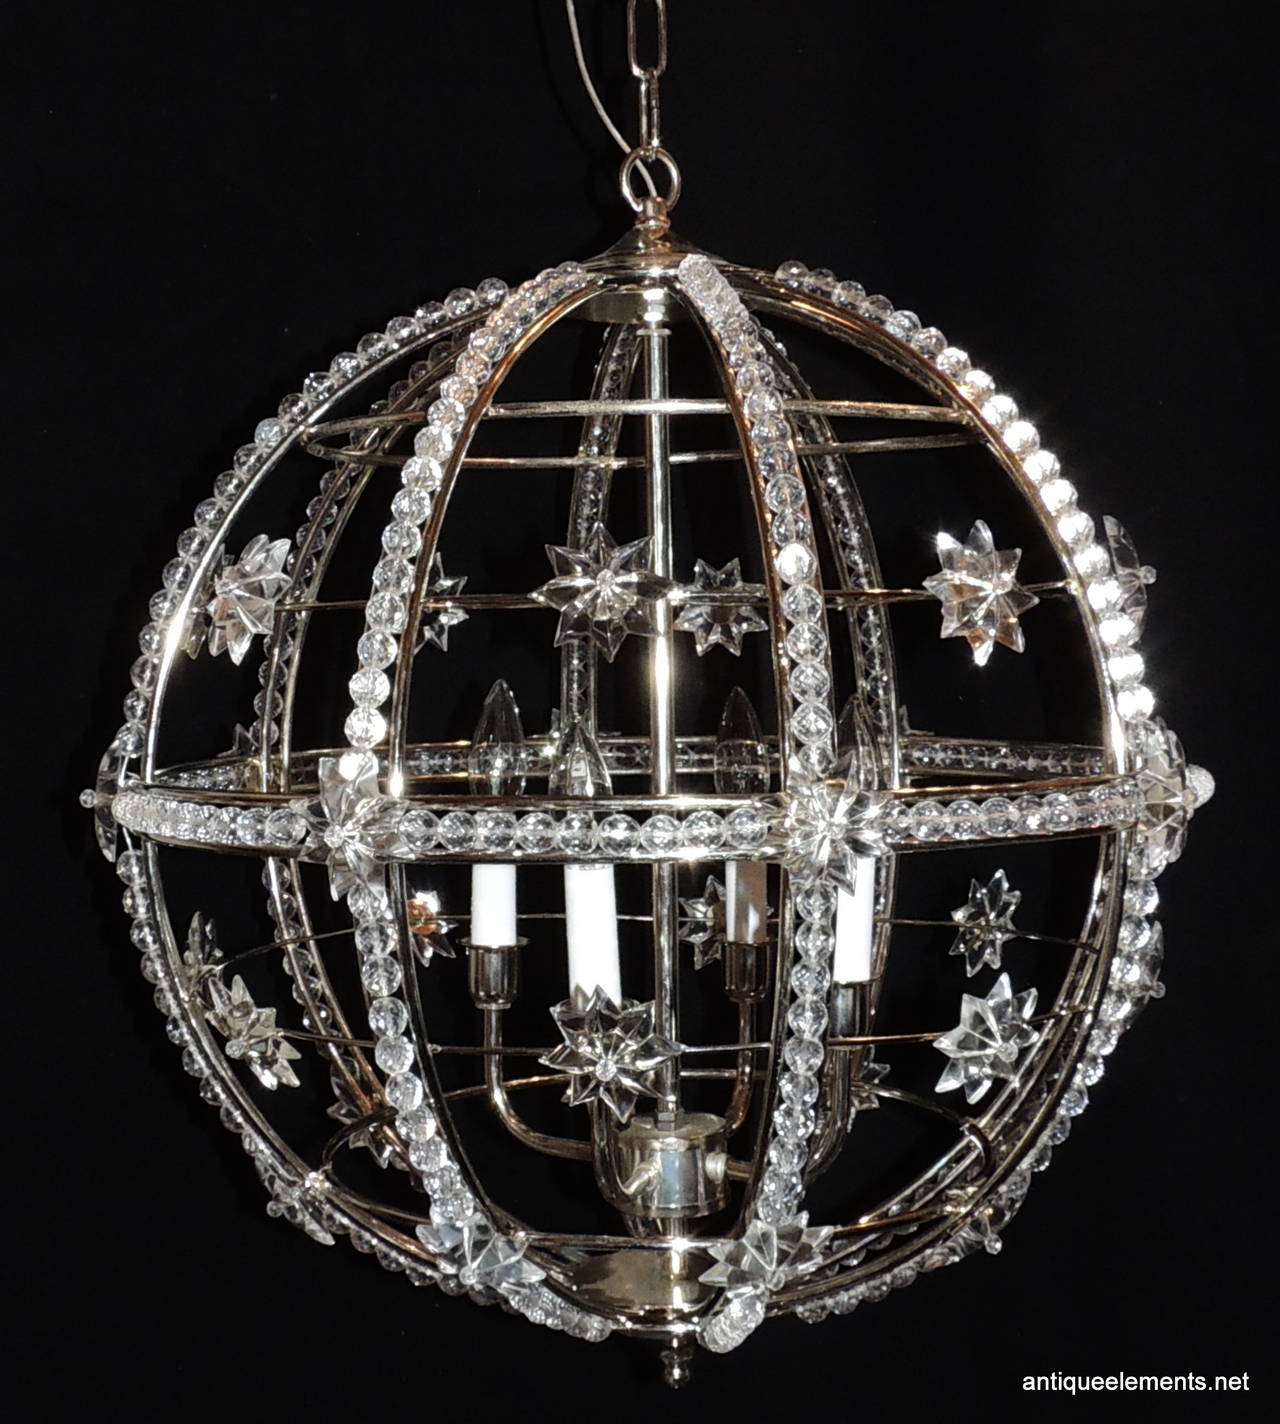 This modern Deco style Polished Nickel chandelier has beautiful crystal bead work surrounding the globe and is accented with crystal stars. There are 4 lights in the center of this wonderful chandelier.

A Pair Is Available...

20